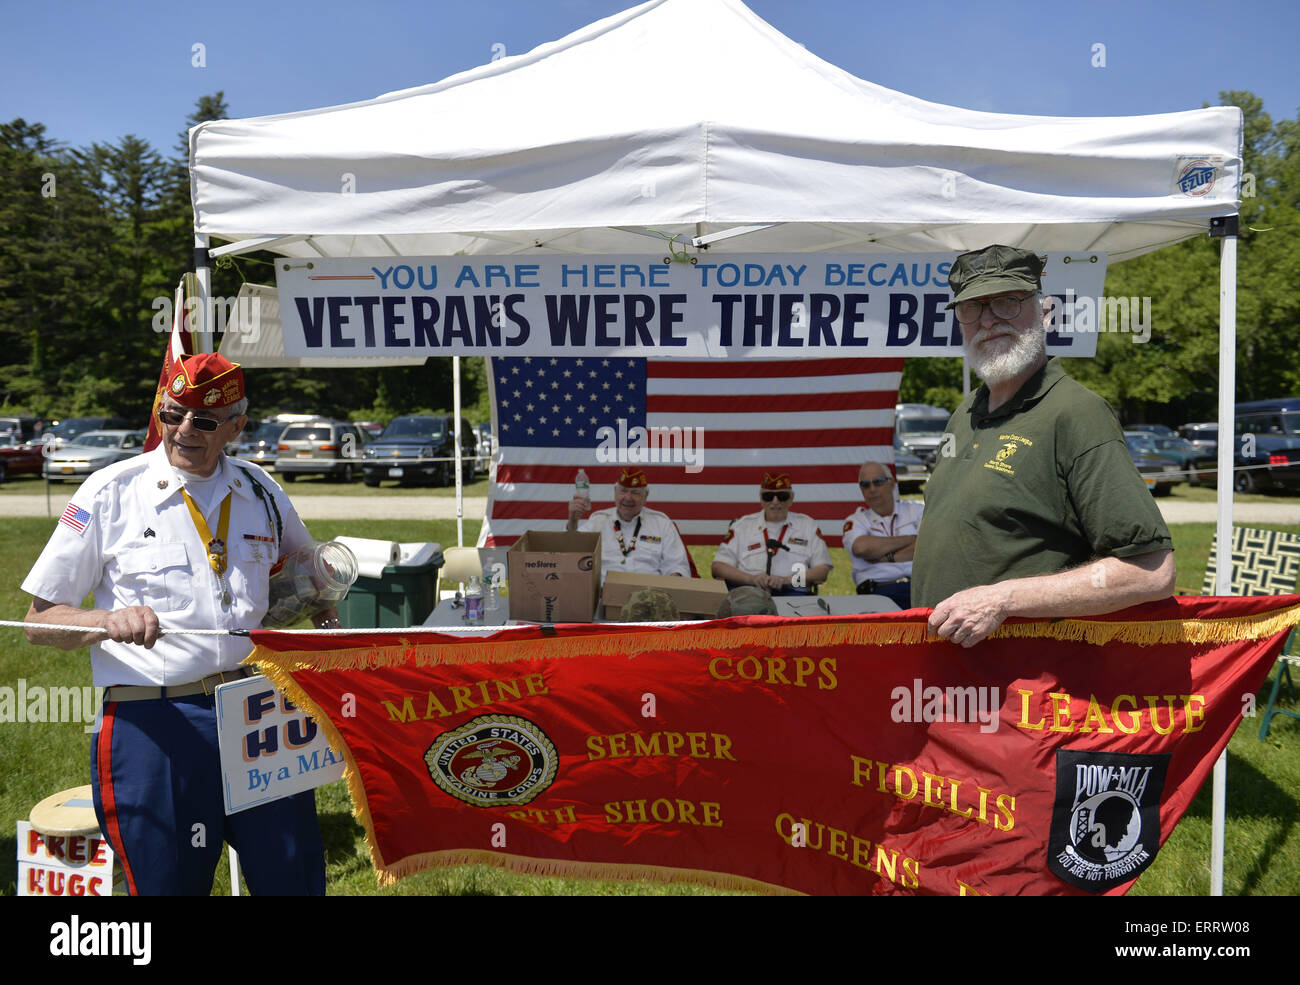 June 7, 2015 - Old Westbury, New York, United States - JOHN GIORDANO of Whitestone, at left, and a fellow marine, hold a red Marine Corps League banner, in front of FREE HUGS By a MARINE fundraising booth of the Marine Corps League North Shore Queens Detachment #240 at the 50th Annual Spring Meet Car Show sponsored by Greater New York Region Antique Automobile Club of America. Over 1,000 antique, classic, and custom cars participated at the popular Long Island vintage car show held at historic Old Westbury Gardens. (Credit Image: © Ann Parry/ZUMA Wire) Stock Photo